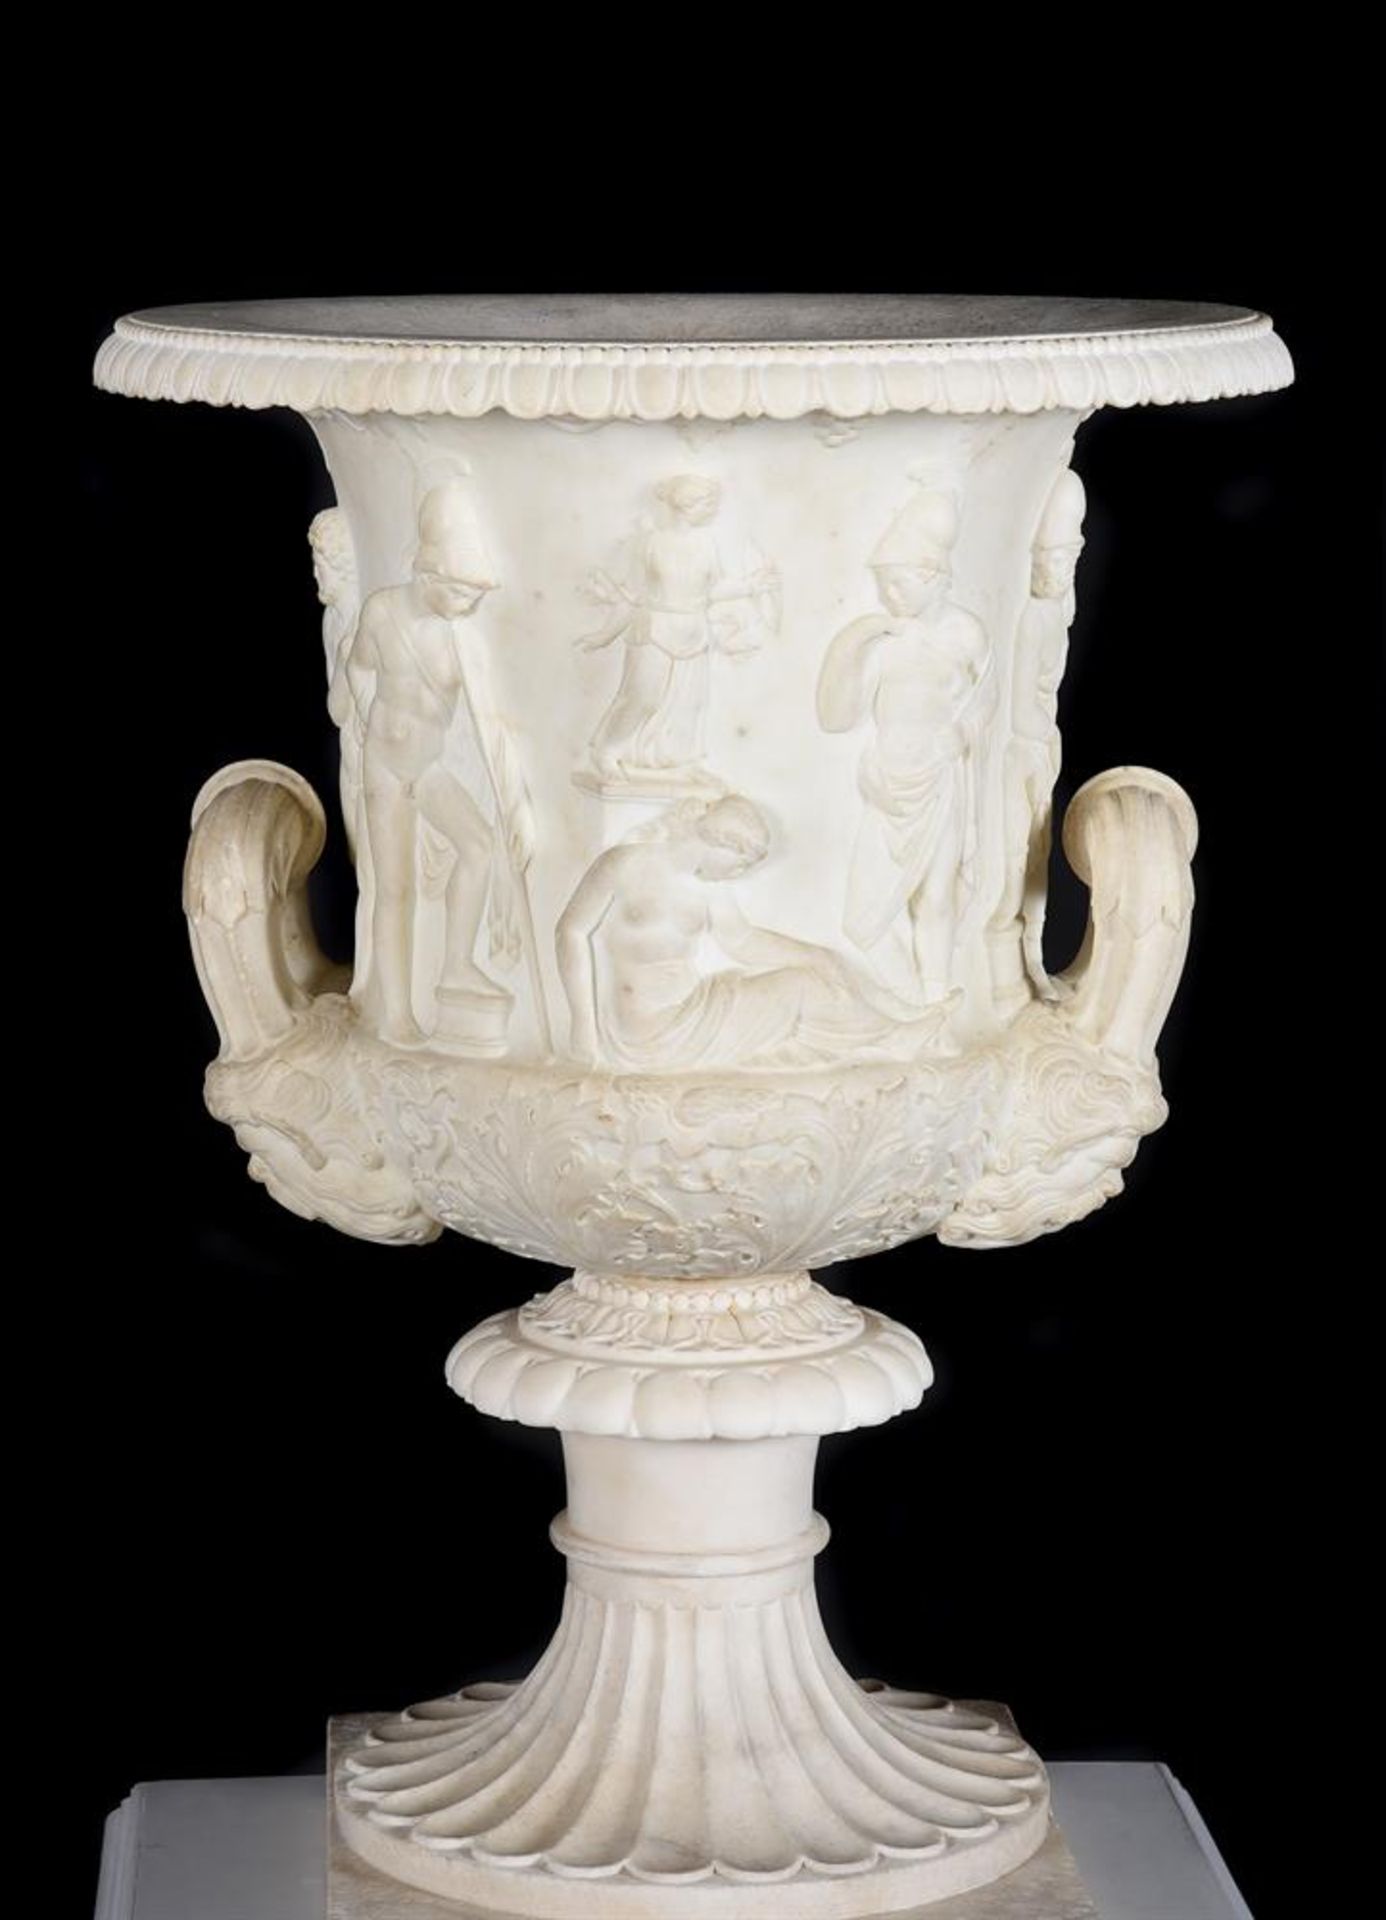 AFTER THE ANTIQUE, A LARGE CARVED MARBLE MEDICI VASE, ITALIAN 19TH CENTURY - Image 8 of 8